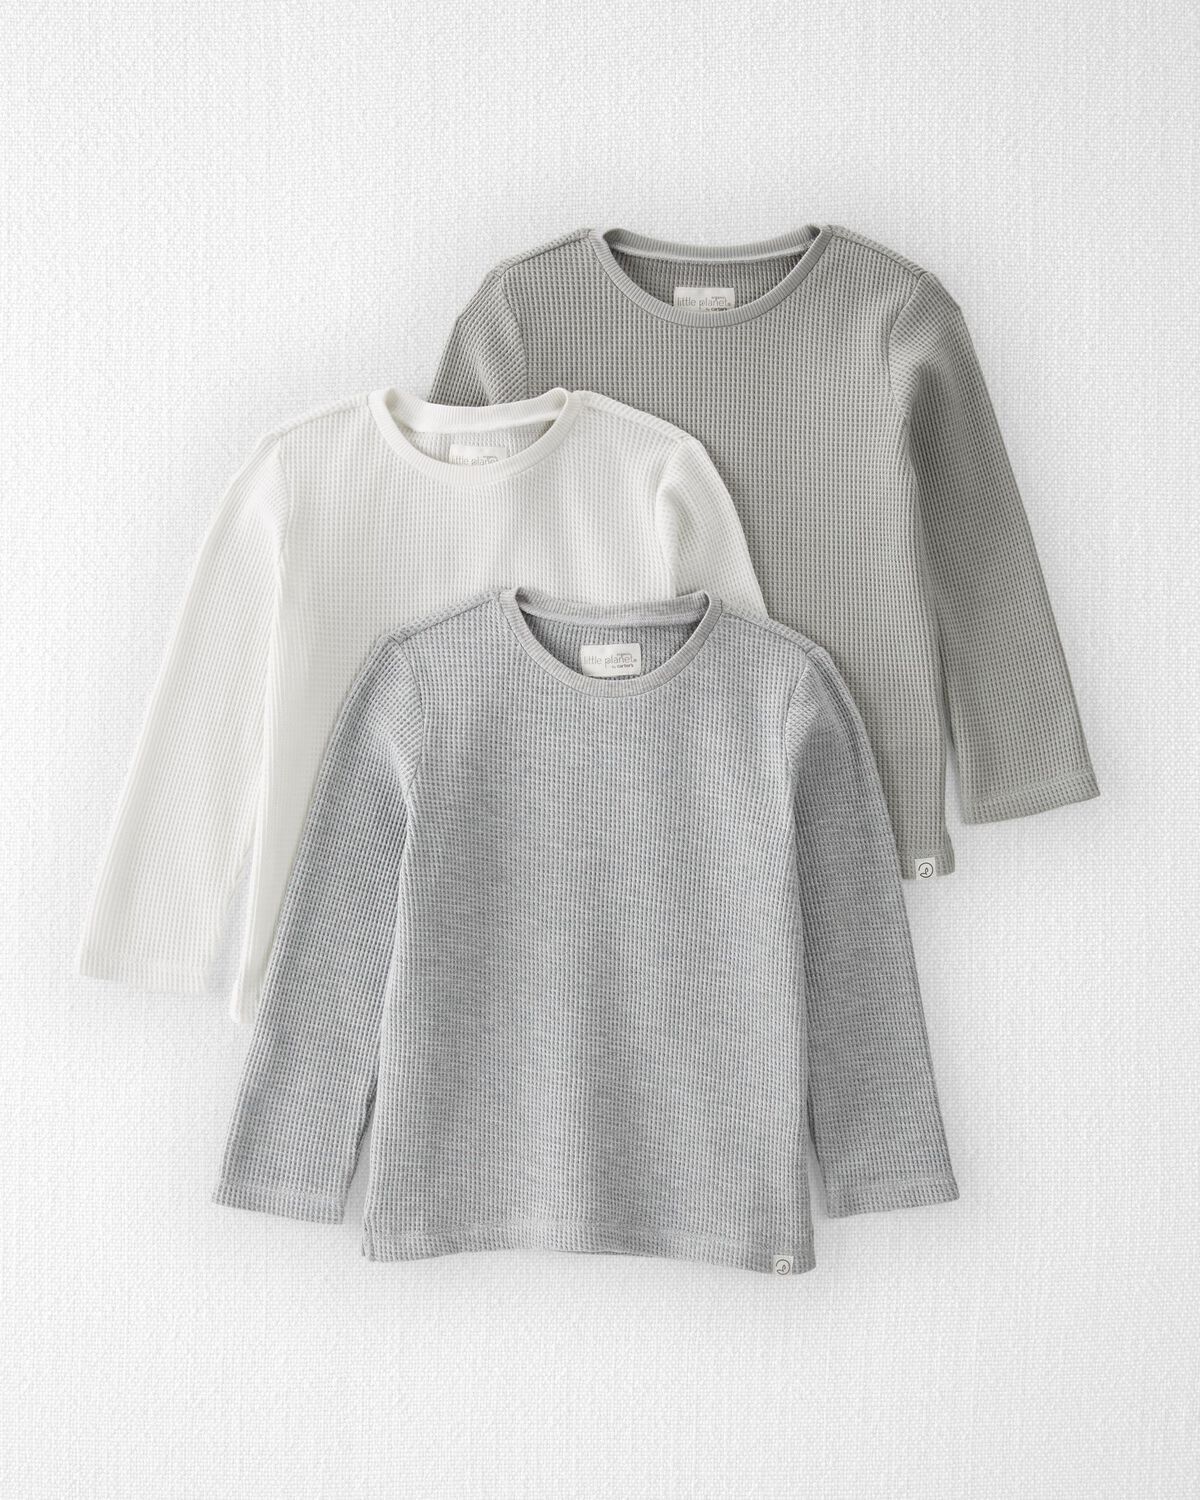 Toddler 3-Pack Waffle Knit Tops Made With Organic Cotton | Carter's